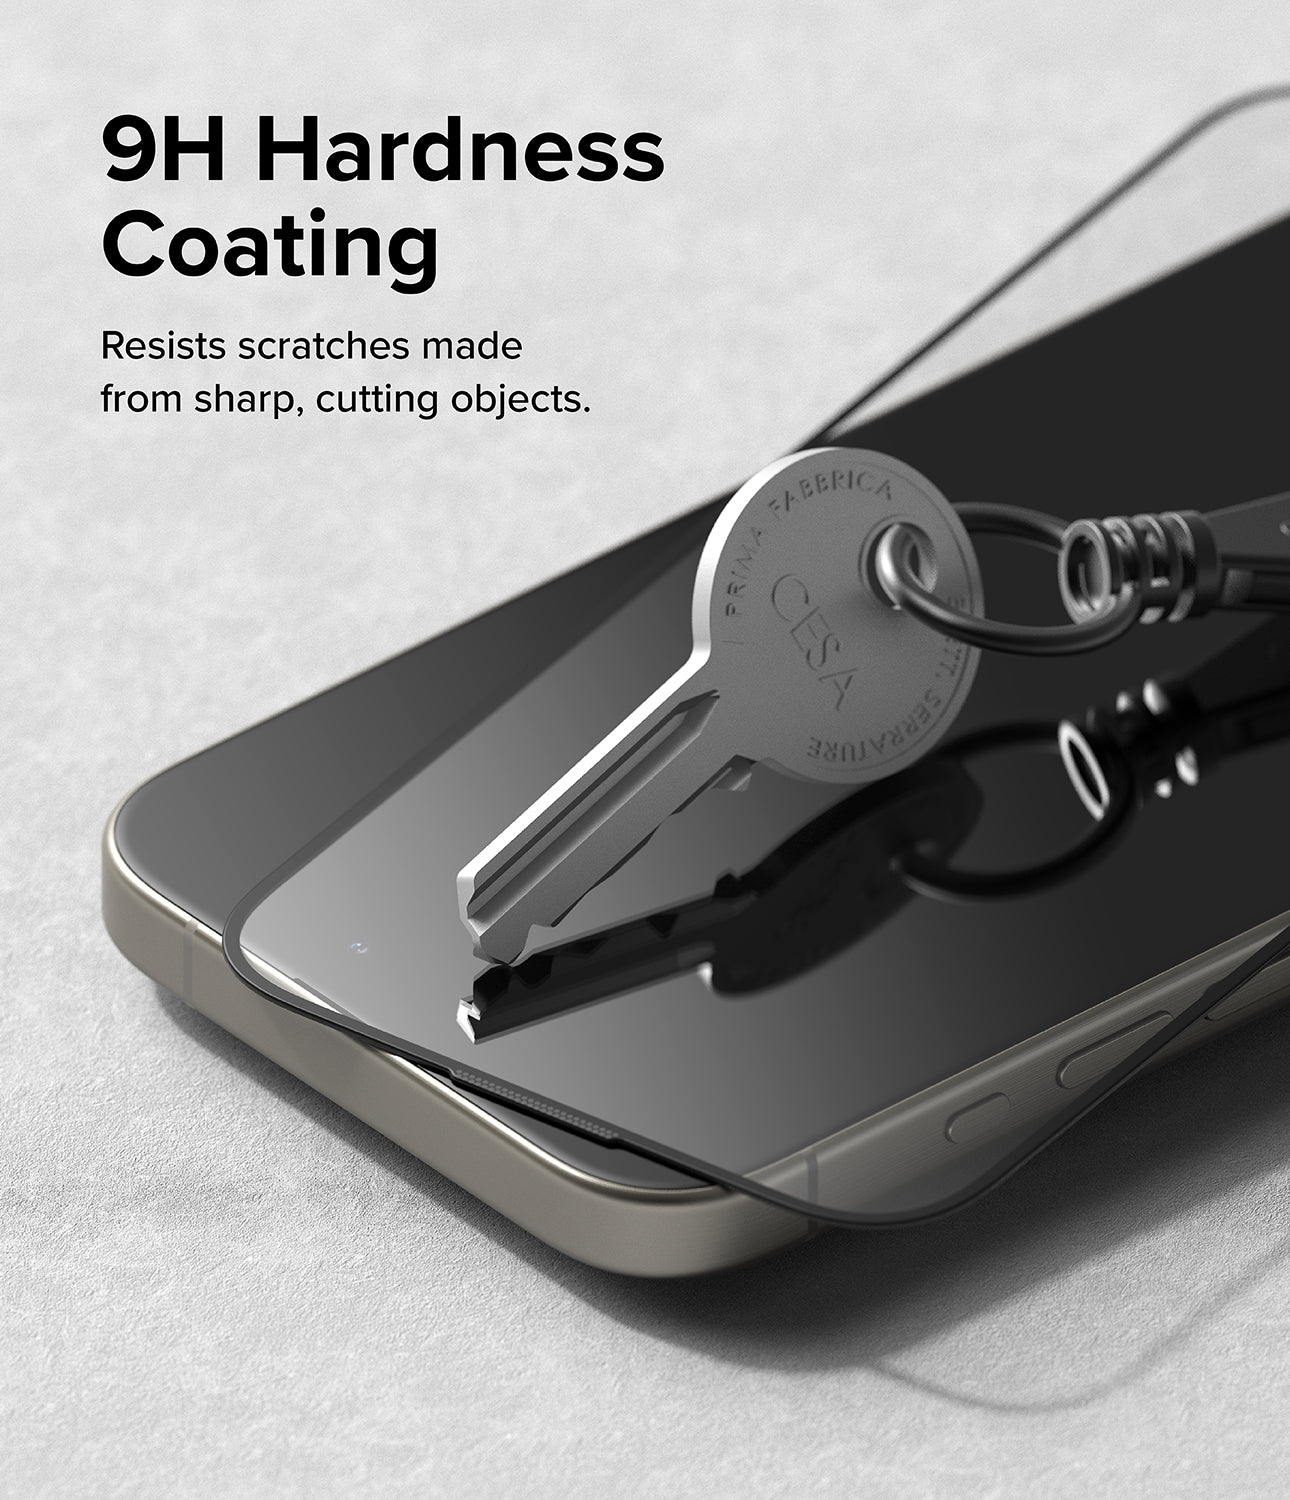 iPhone 15 Pro Screen Protector | Easy Slide Tempered Glass- 9H Hardness Coating. Resists scratches made from sharp, cutting objects.